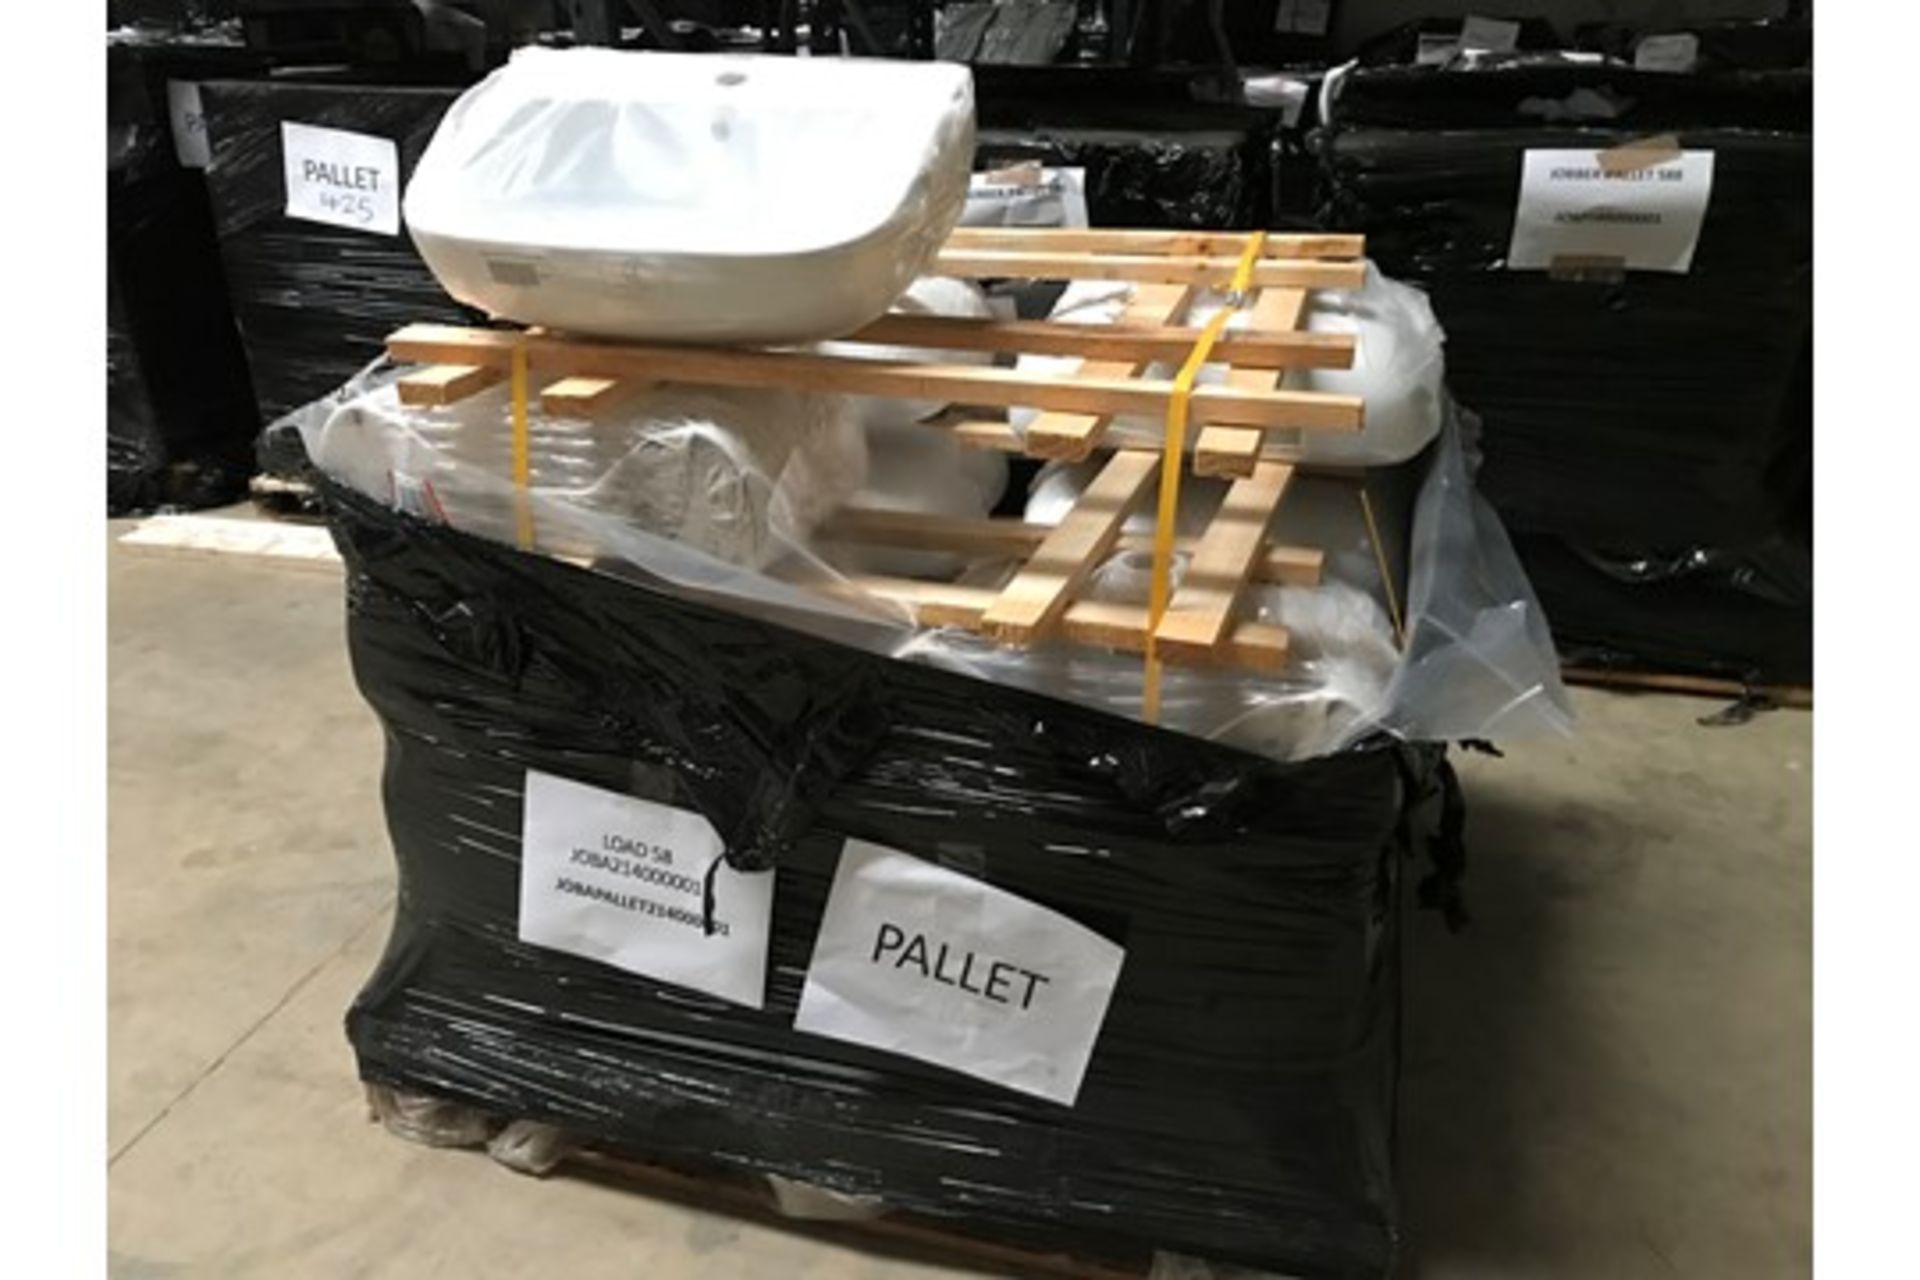 Pallet 215 - 16 x Phase Short Projection Basin - Image 3 of 3